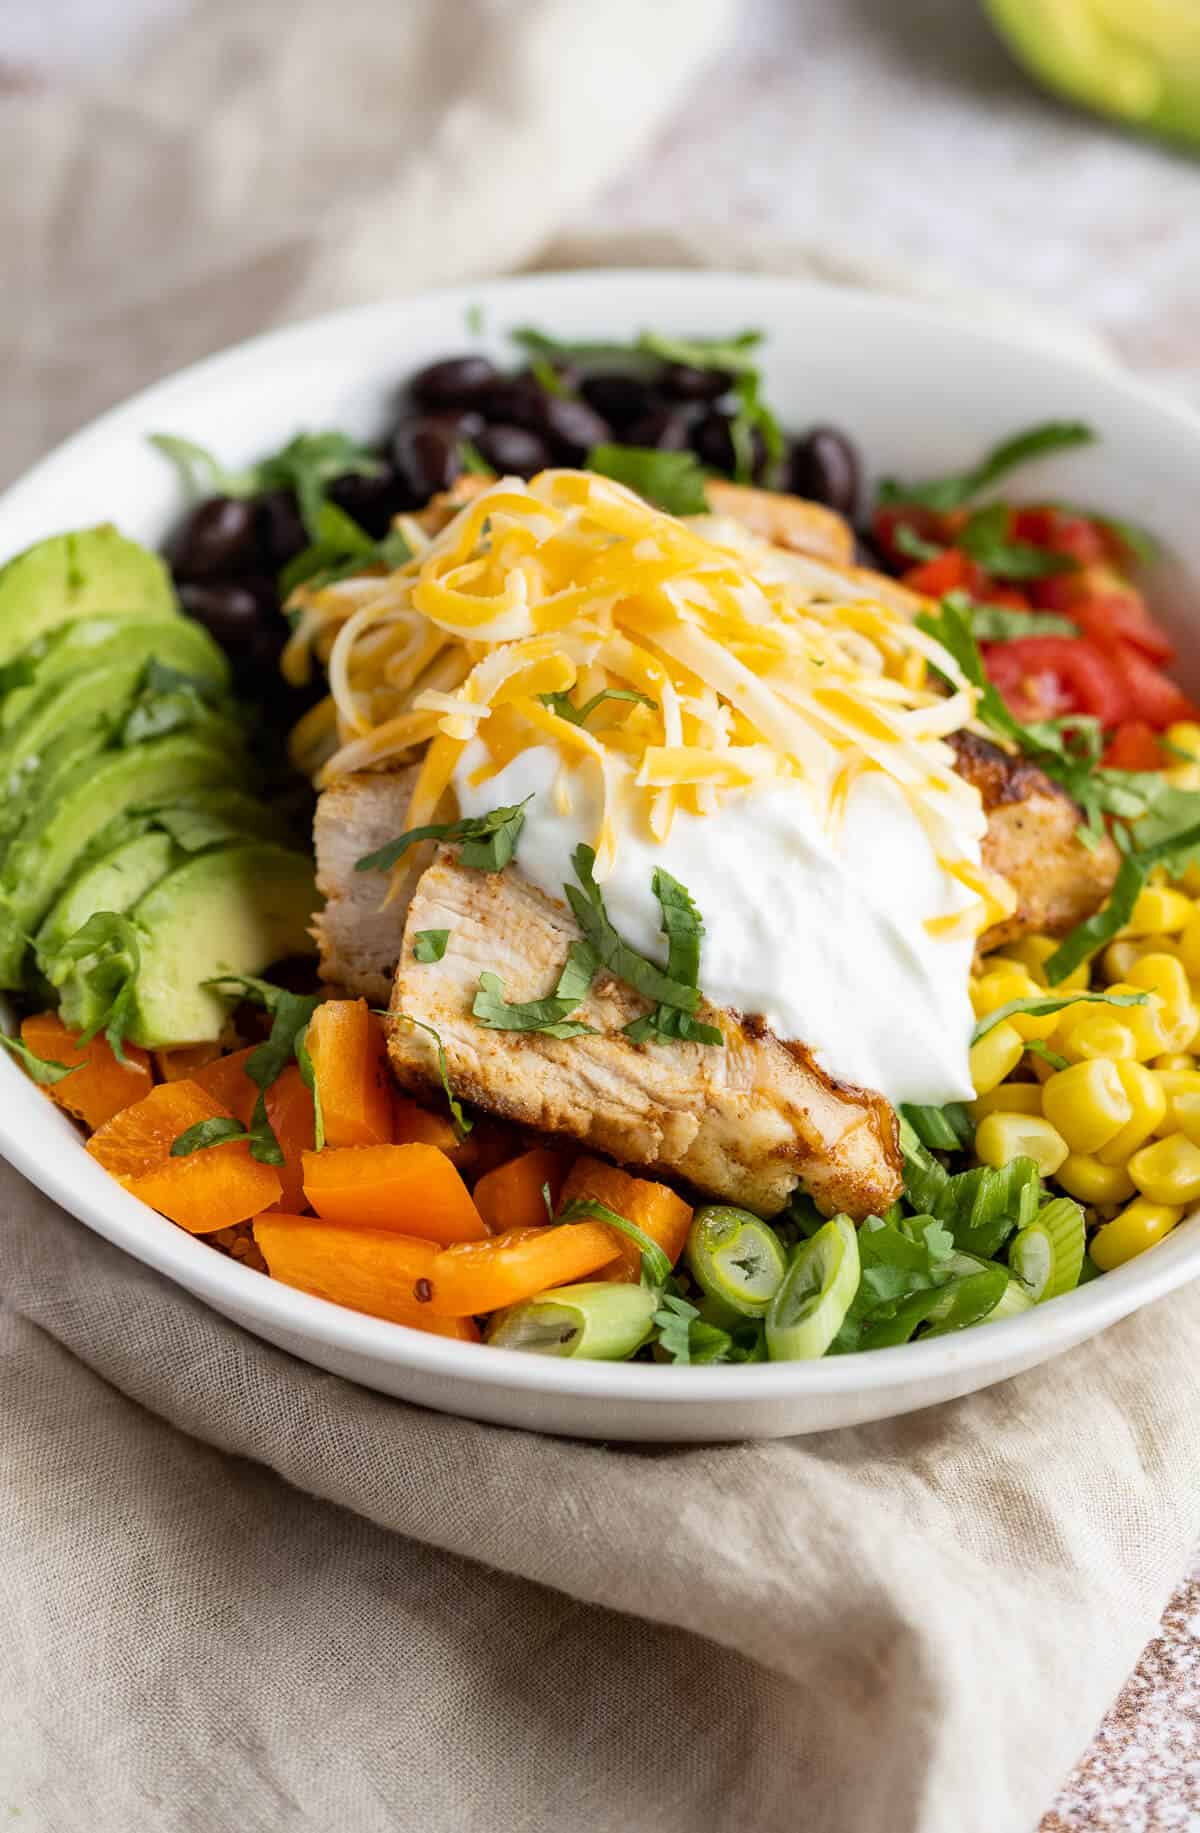 Bowl of Southwest grilled chicken on top of a bed of quinoa, black beans, corn, tomatoes, peppers, and avocado, garnished with cheese and sour cream.